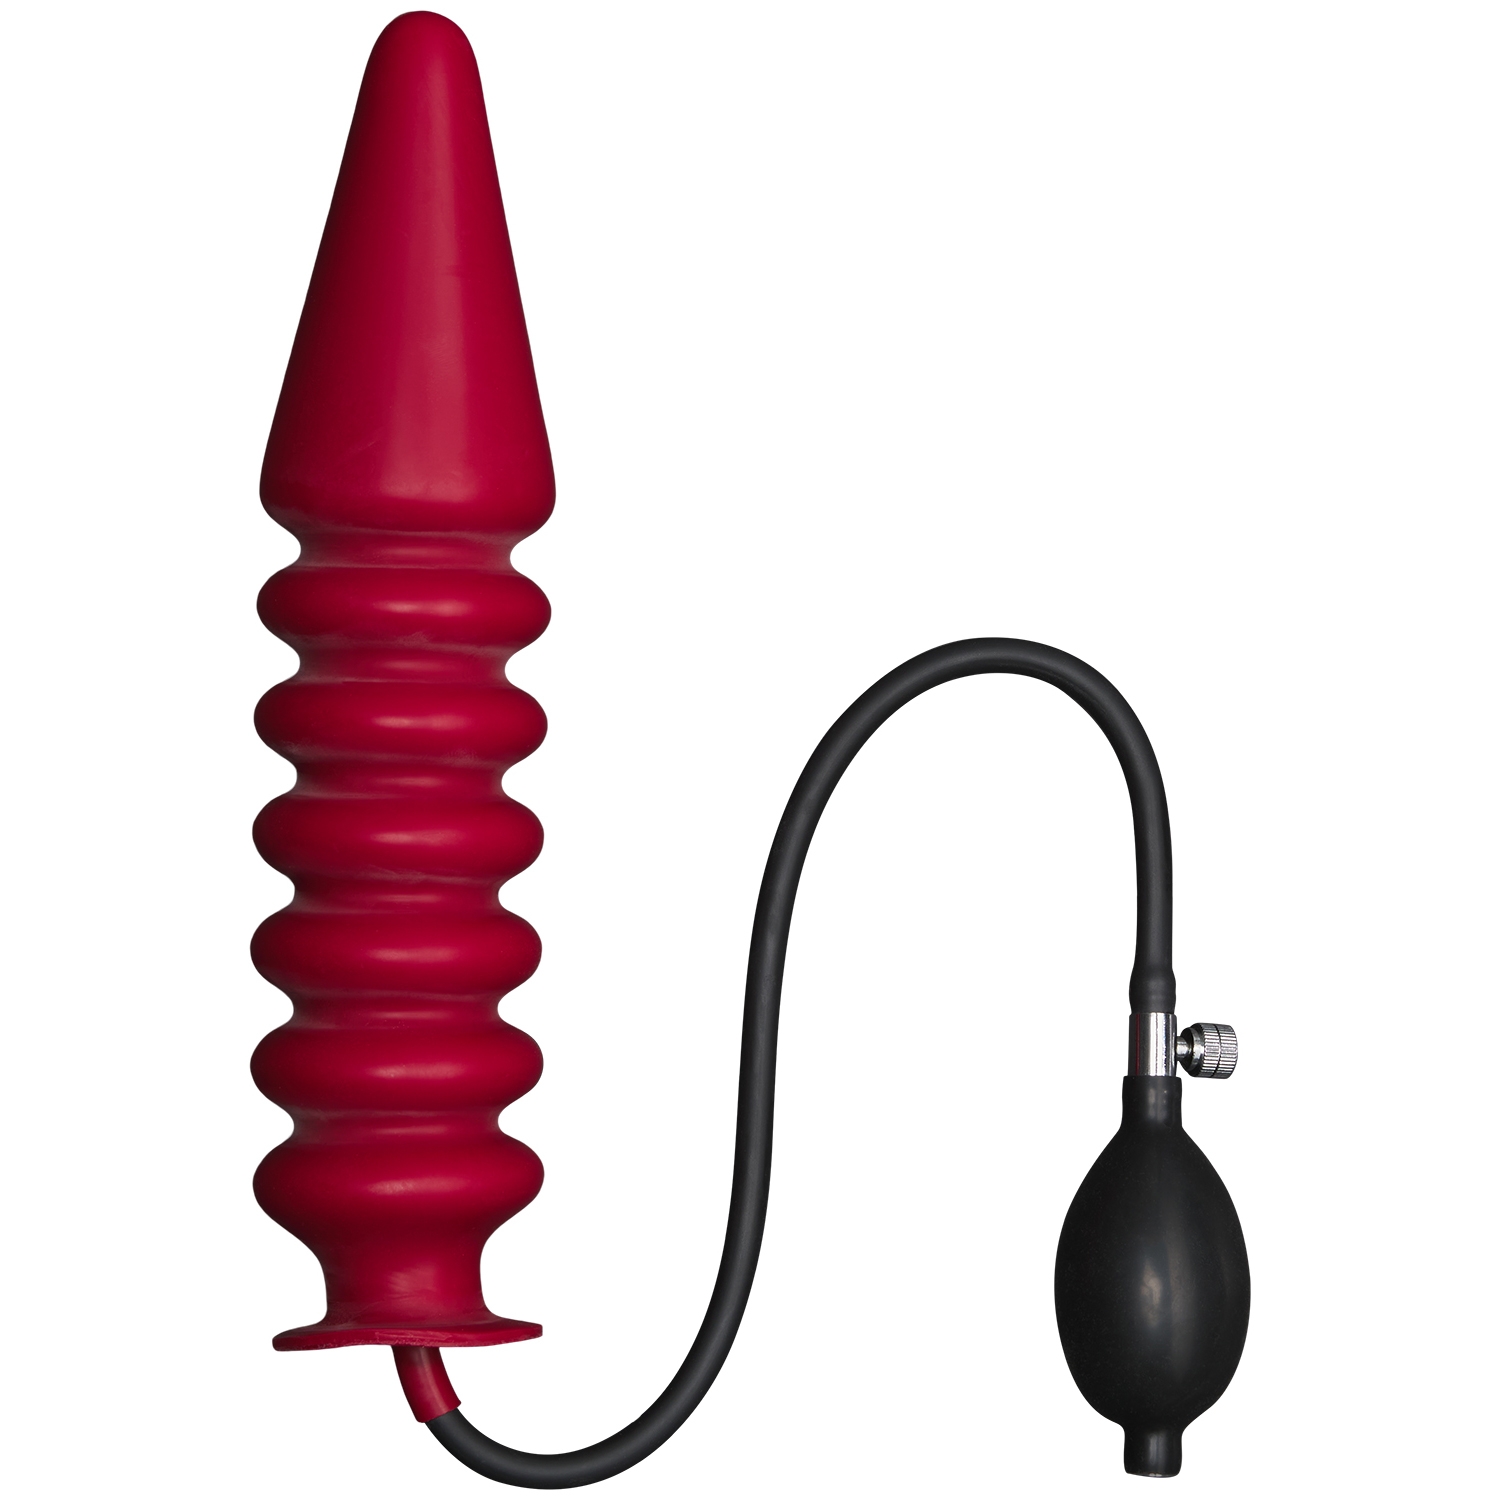 Mister B Inflatable Solid Ribbed Dildo - Red L - Red